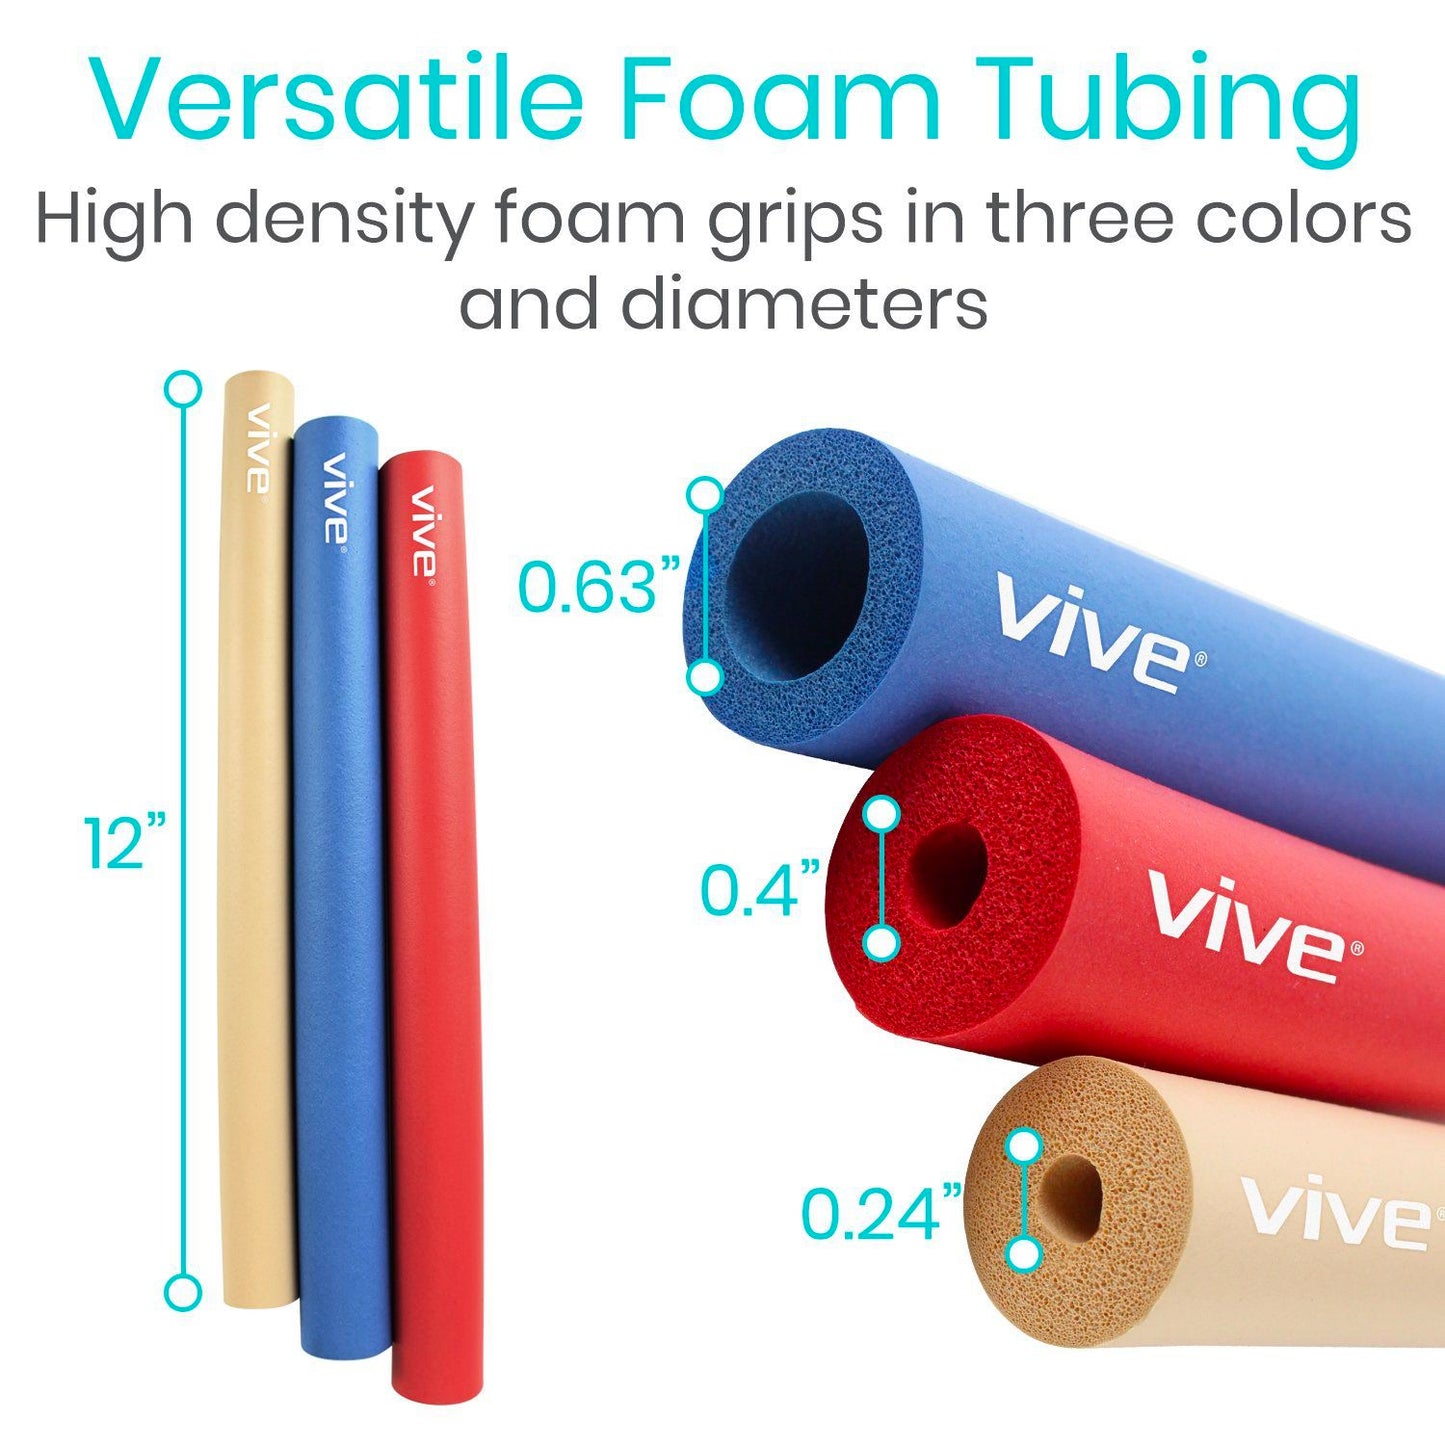 foam tubing with dimensions presented. 3 sizes with diameters of .63", .4" and .24"